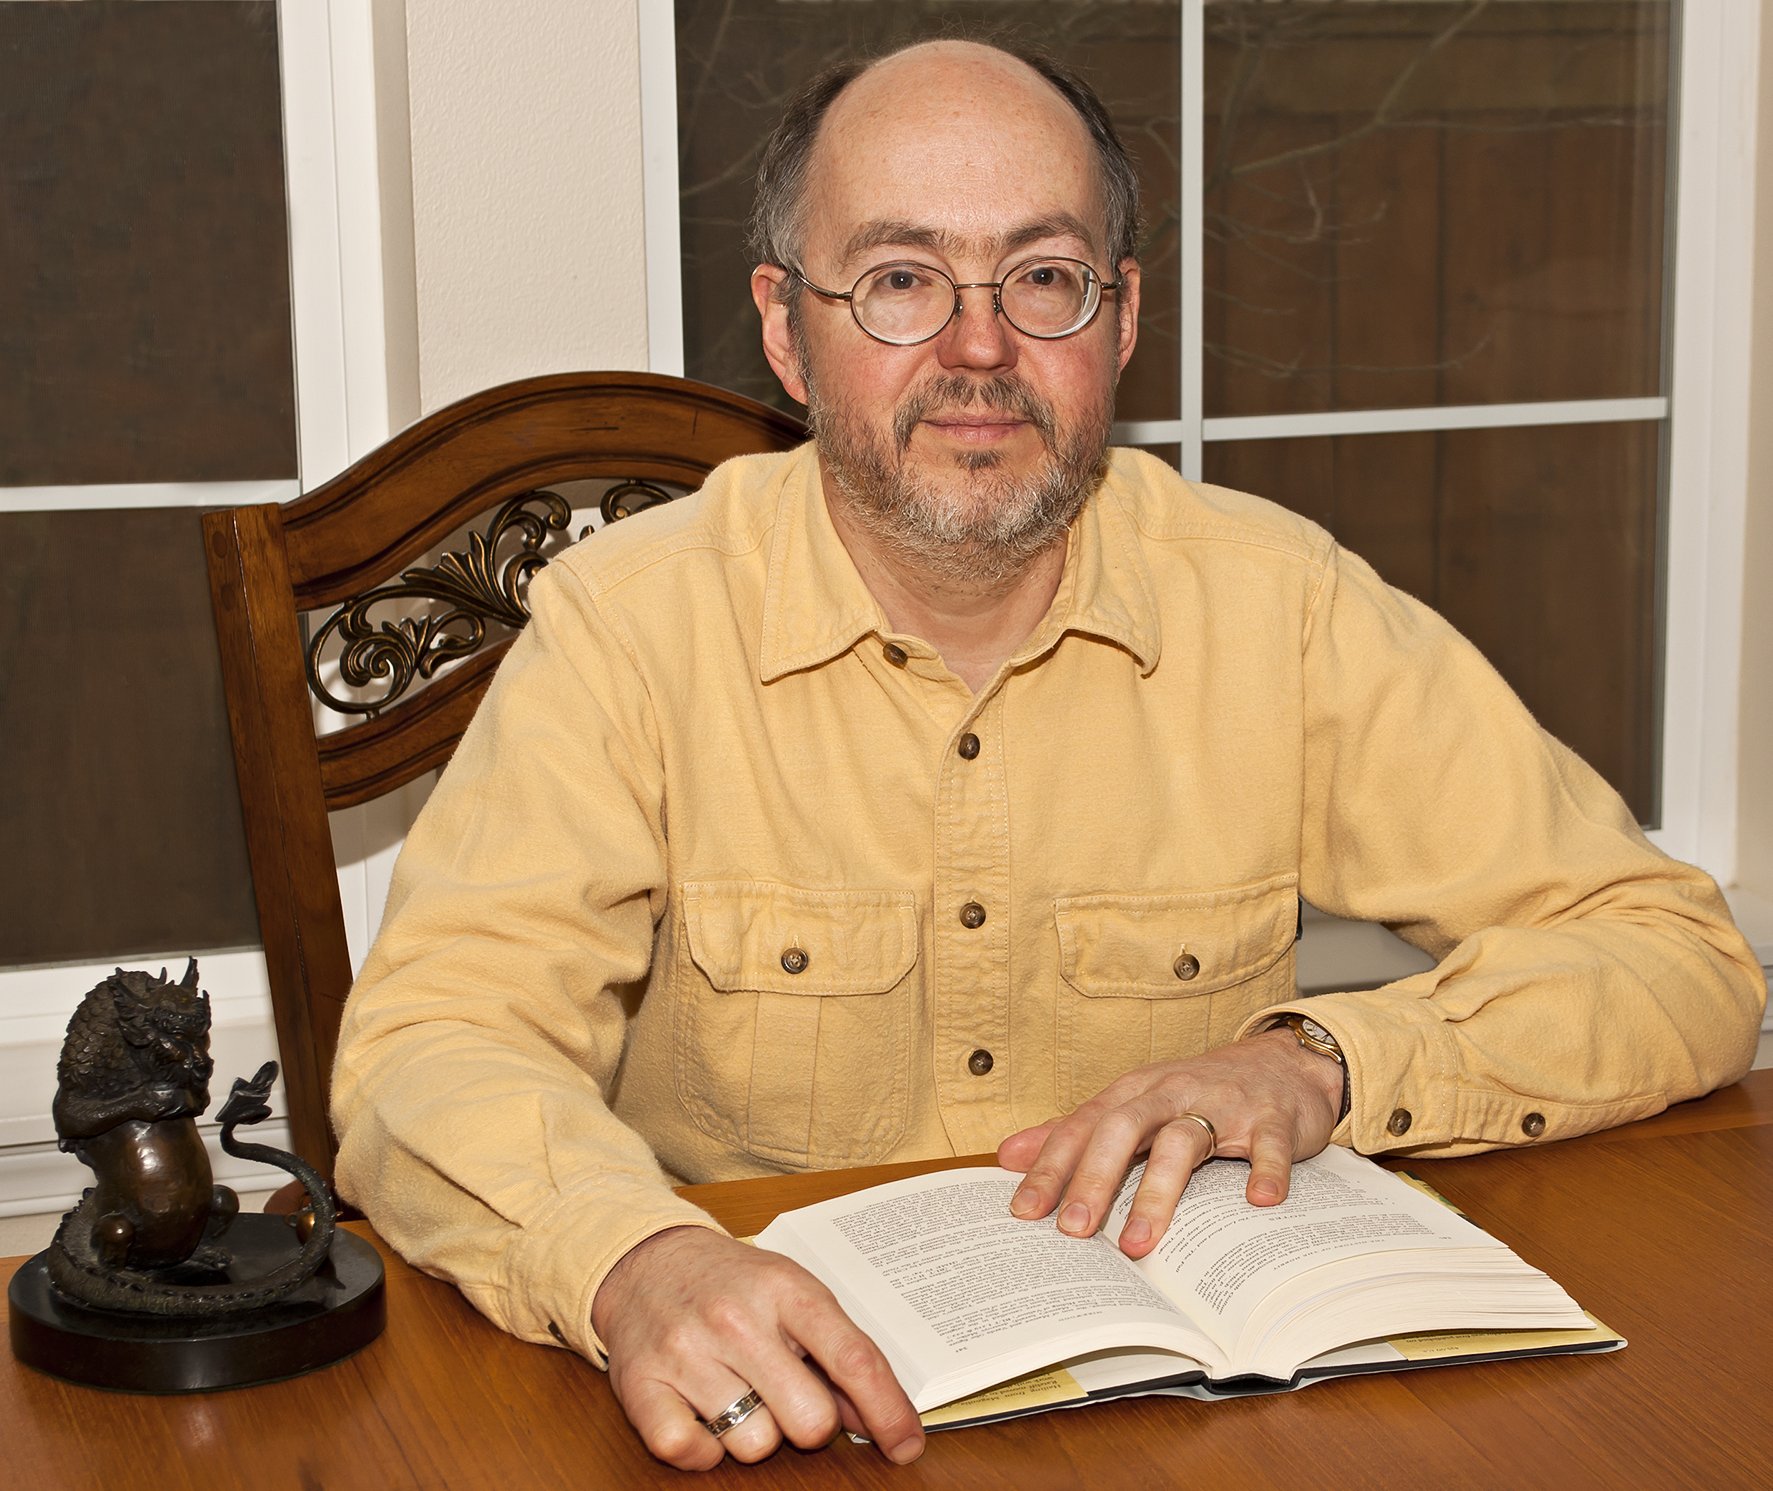 John D. Rateliff has achieved widespread recognition among role-playing game designers and Tolkien scholars.